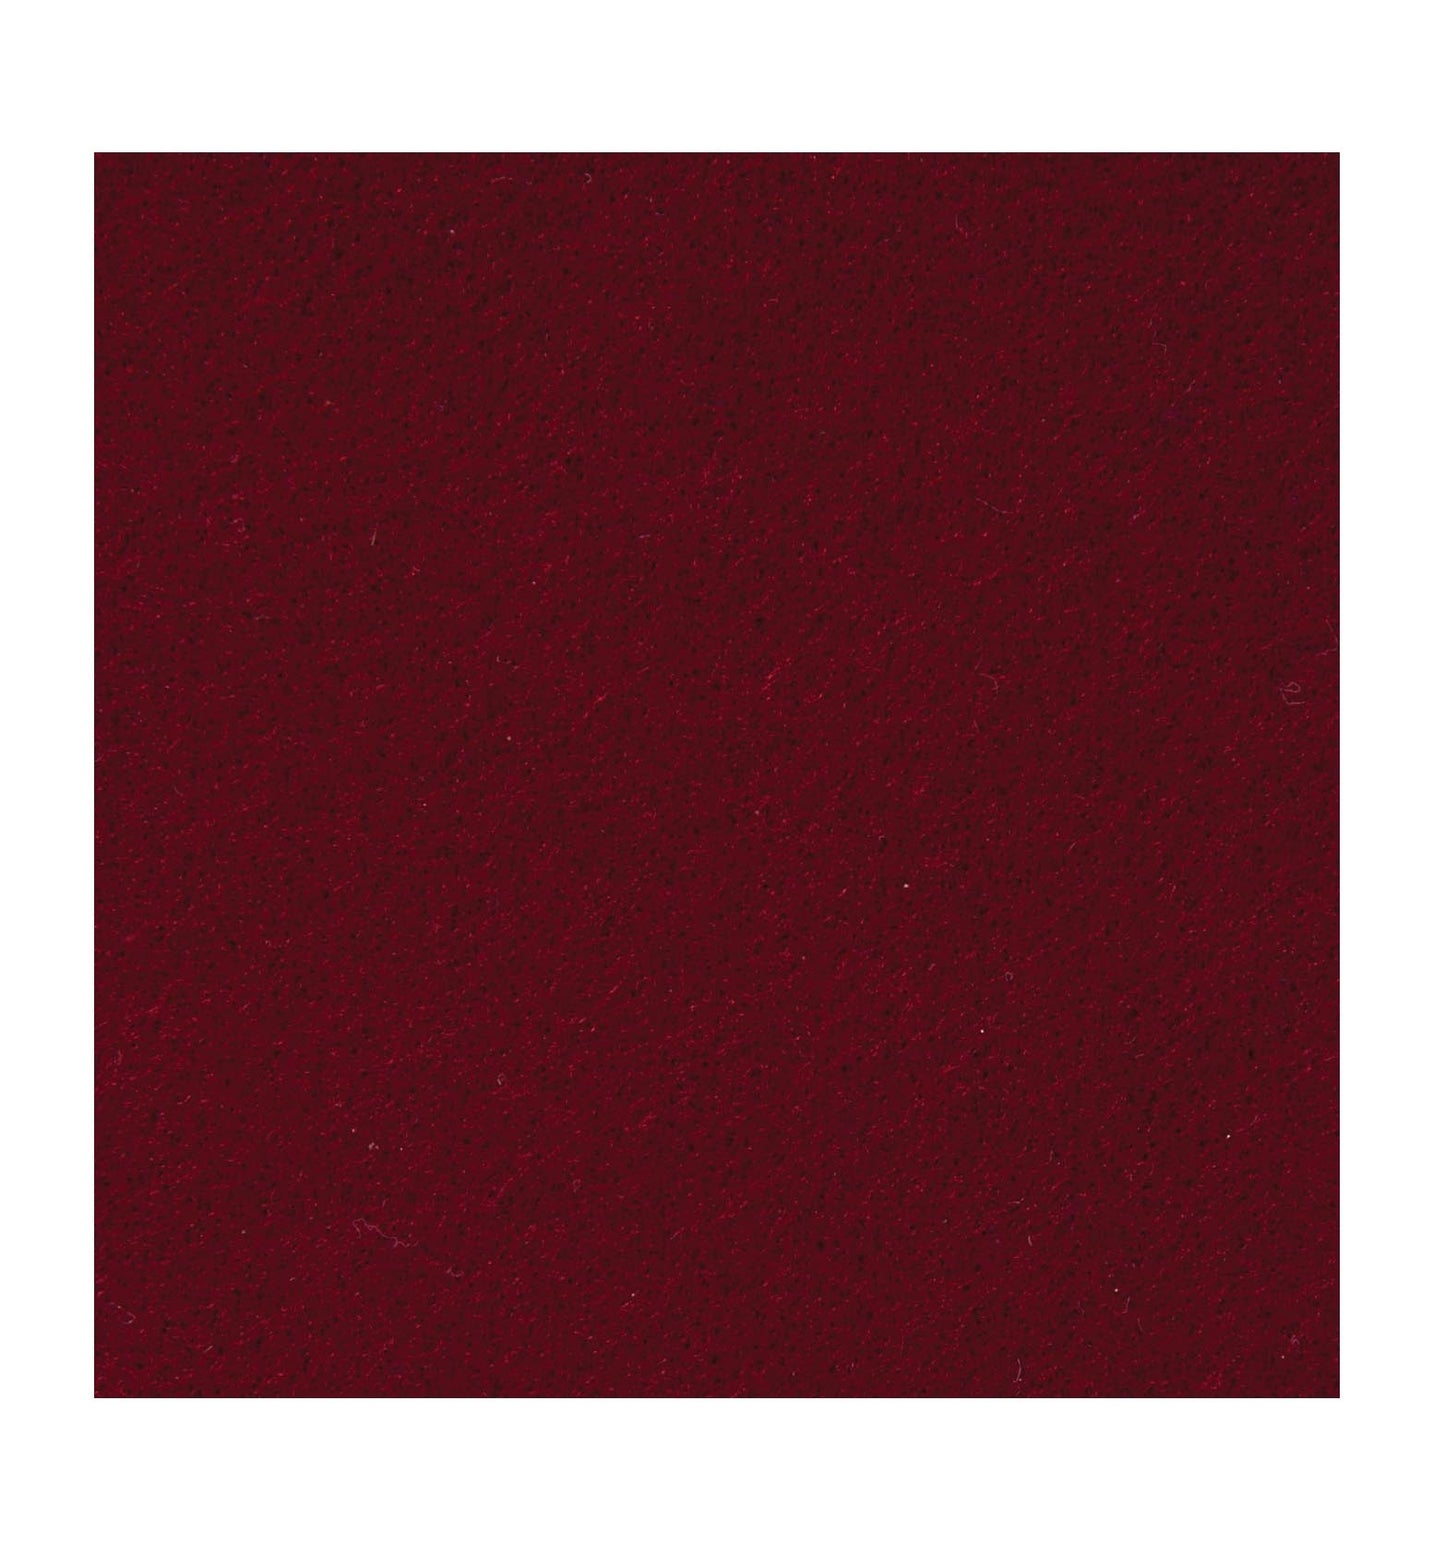 36 Inch Square Soft Wine Color Adhesive Backed Felt